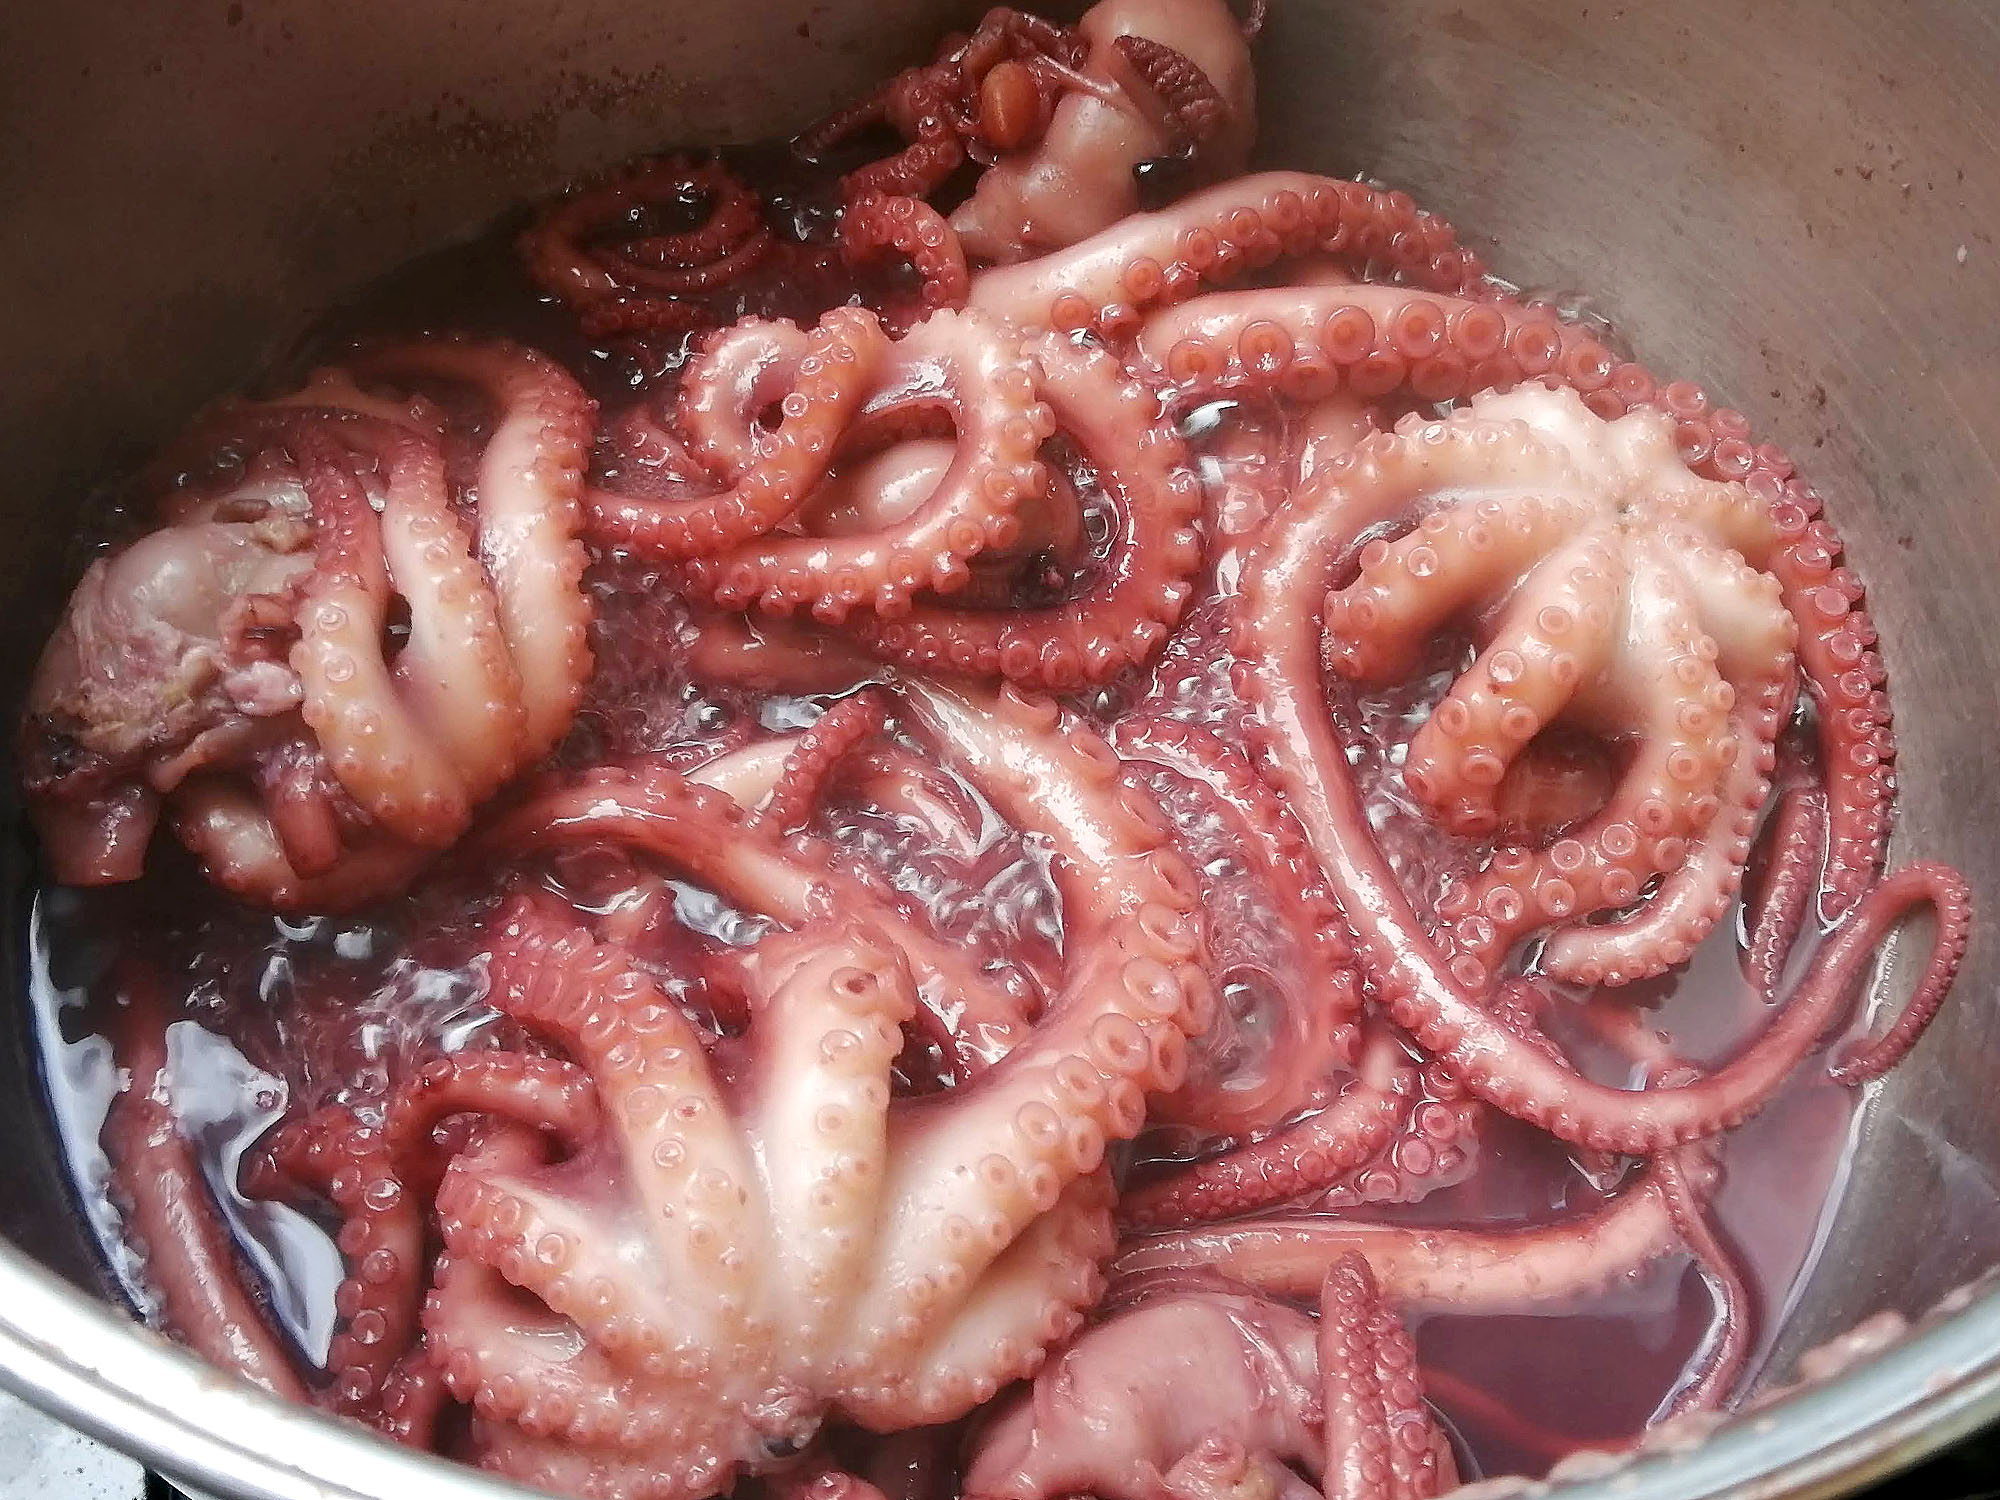 A close-up view of many octopi boiling in a pot of water. Photo by Paul Young.